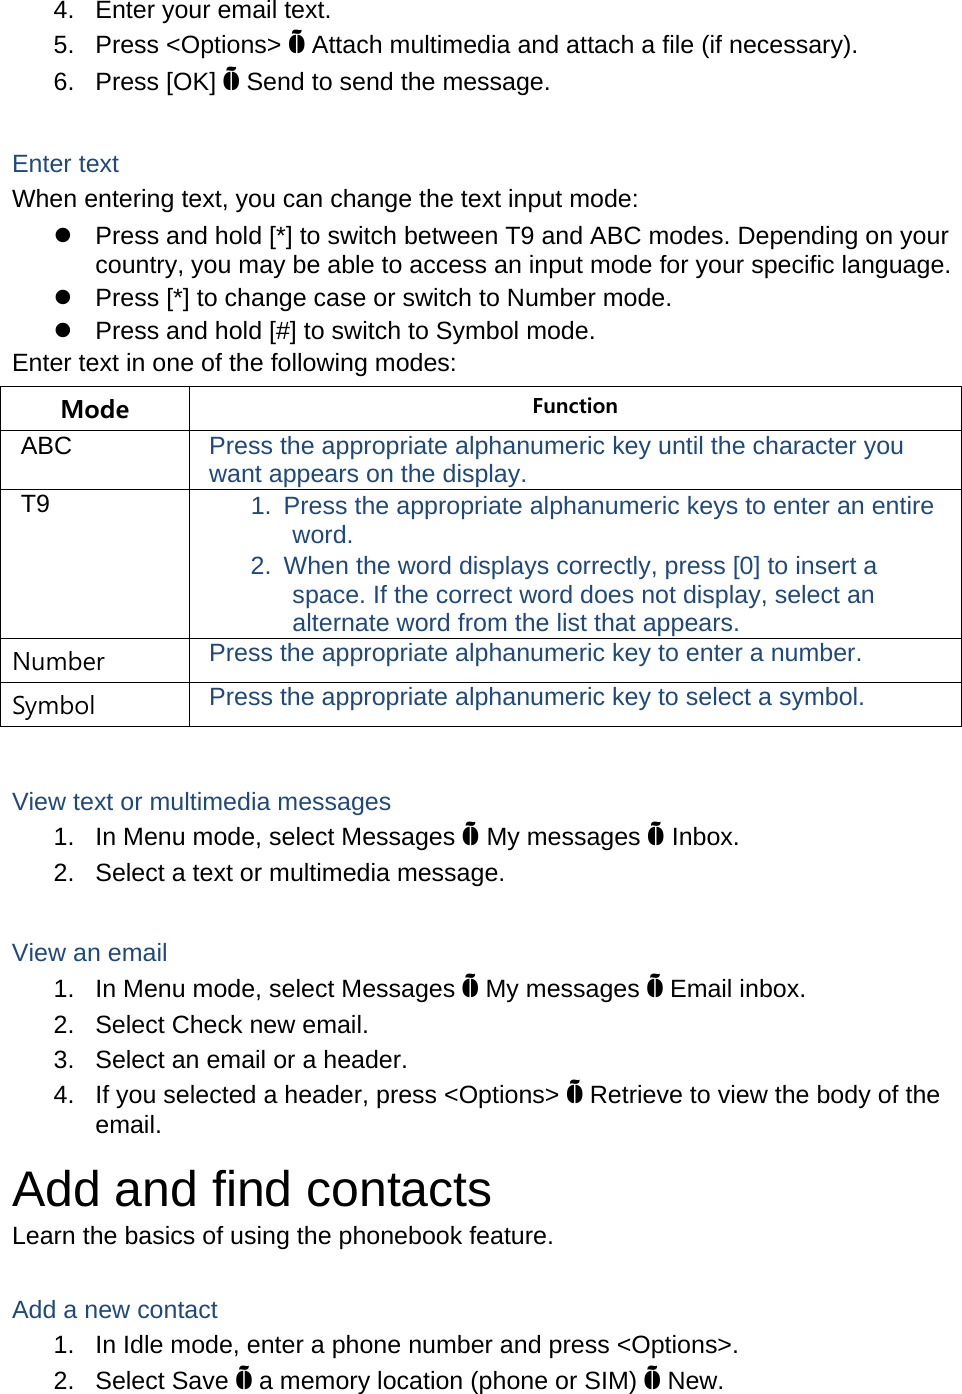 4.  Enter your email text. 5. Press &lt;Options&gt; Õ Attach multimedia and attach a file (if necessary). 6. Press [OK] Õ Send to send the message.  Enter text When entering text, you can change the text input mode: z  Press and hold [*] to switch between T9 and ABC modes. Depending on your country, you may be able to access an input mode for your specific language. z  Press [*] to change case or switch to Number mode. z  Press and hold [#] to switch to Symbol mode. Enter text in one of the following modes: Mode  Function ABC  Press the appropriate alphanumeric key until the character you want appears on the display. T9  1.  Press the appropriate alphanumeric keys to enter an entire word. 2.  When the word displays correctly, press [0] to insert a space. If the correct word does not display, select an alternate word from the list that appears. Number  Press the appropriate alphanumeric key to enter a number. Symbol  Press the appropriate alphanumeric key to select a symbol.  View text or multimedia messages 1.  In Menu mode, select Messages Õ My messages Õ Inbox. 2.  Select a text or multimedia message.  View an email 1.  In Menu mode, select Messages Õ My messages Õ Email inbox. 2.  Select Check new email. 3.  Select an email or a header. 4.  If you selected a header, press &lt;Options&gt; Õ Retrieve to view the body of the email. Add and find contacts Learn the basics of using the phonebook feature.  Add a new contact 1.  In Idle mode, enter a phone number and press &lt;Options&gt;. 2. Select Save Õ a memory location (phone or SIM) Õ New.   